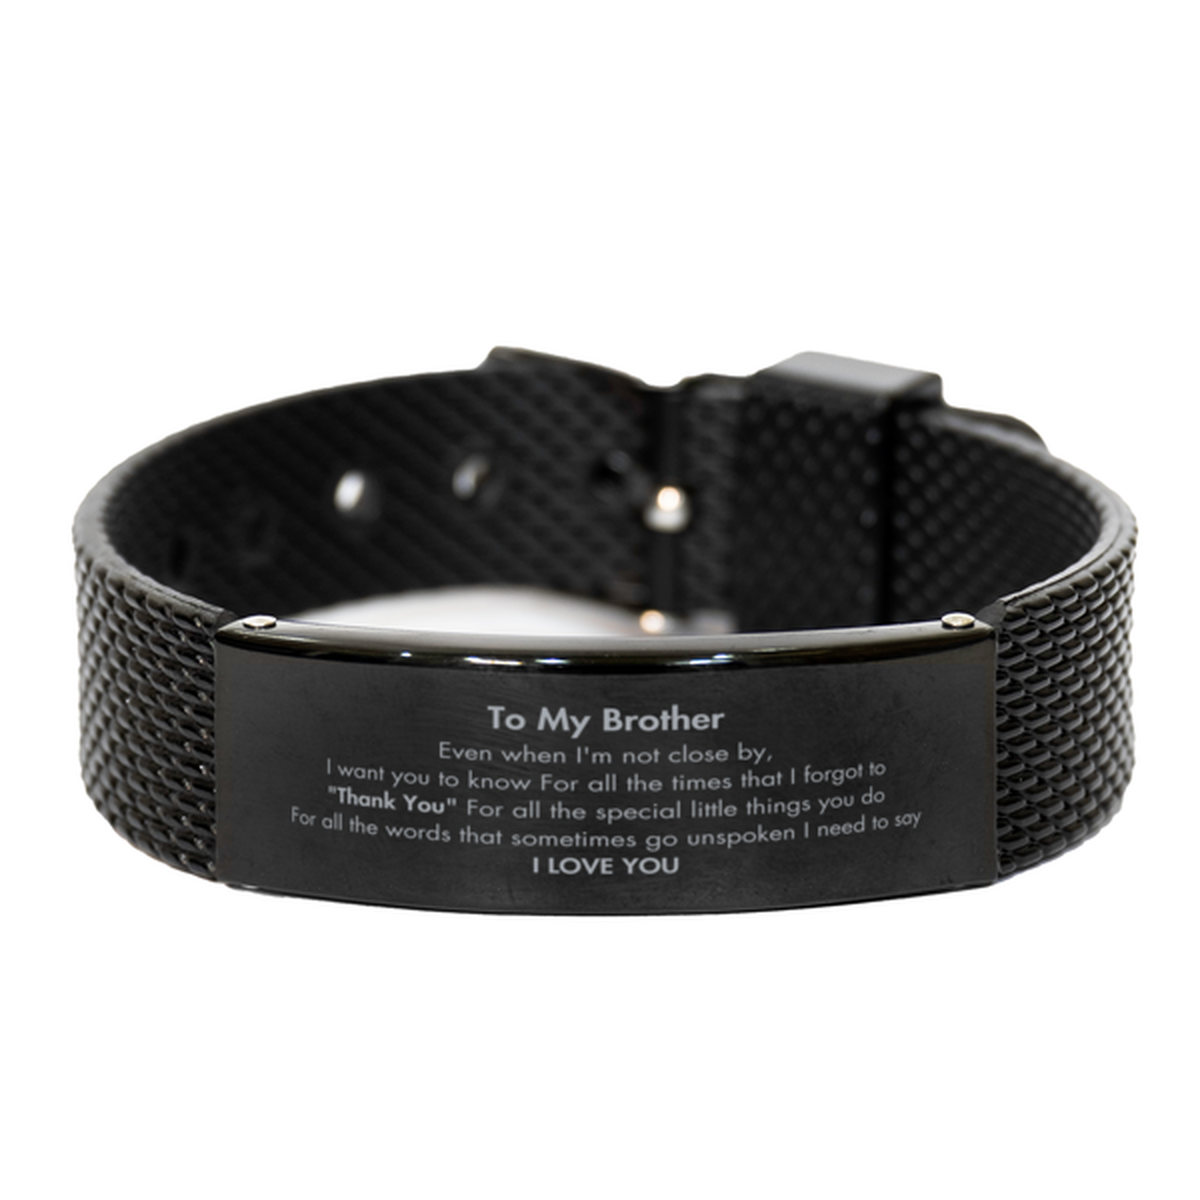 Thank You Gifts for Brother, Keepsake Black Shark Mesh Bracelet Gifts for Brother Birthday Mother's day Father's Day Brother For all the words That sometimes go unspoken I need to say I LOVE YOU